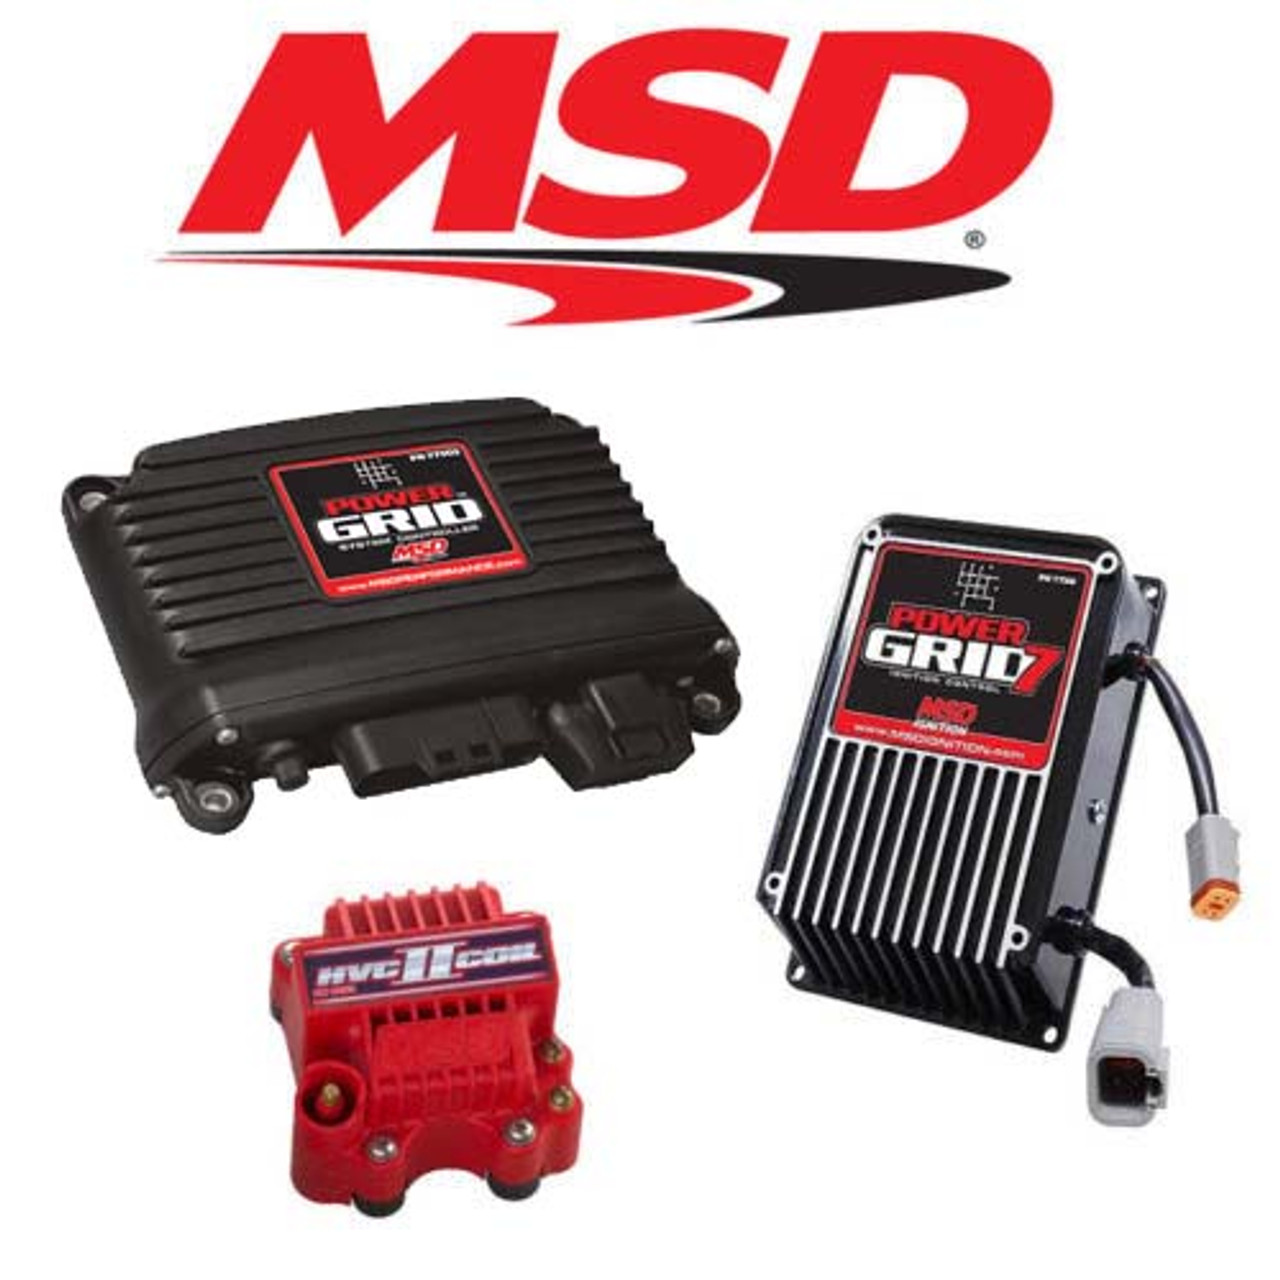 MSD 9961 Power Grid Ignition Kit - 77303 Controller/7720 Ignition/8261 HVC  Coil